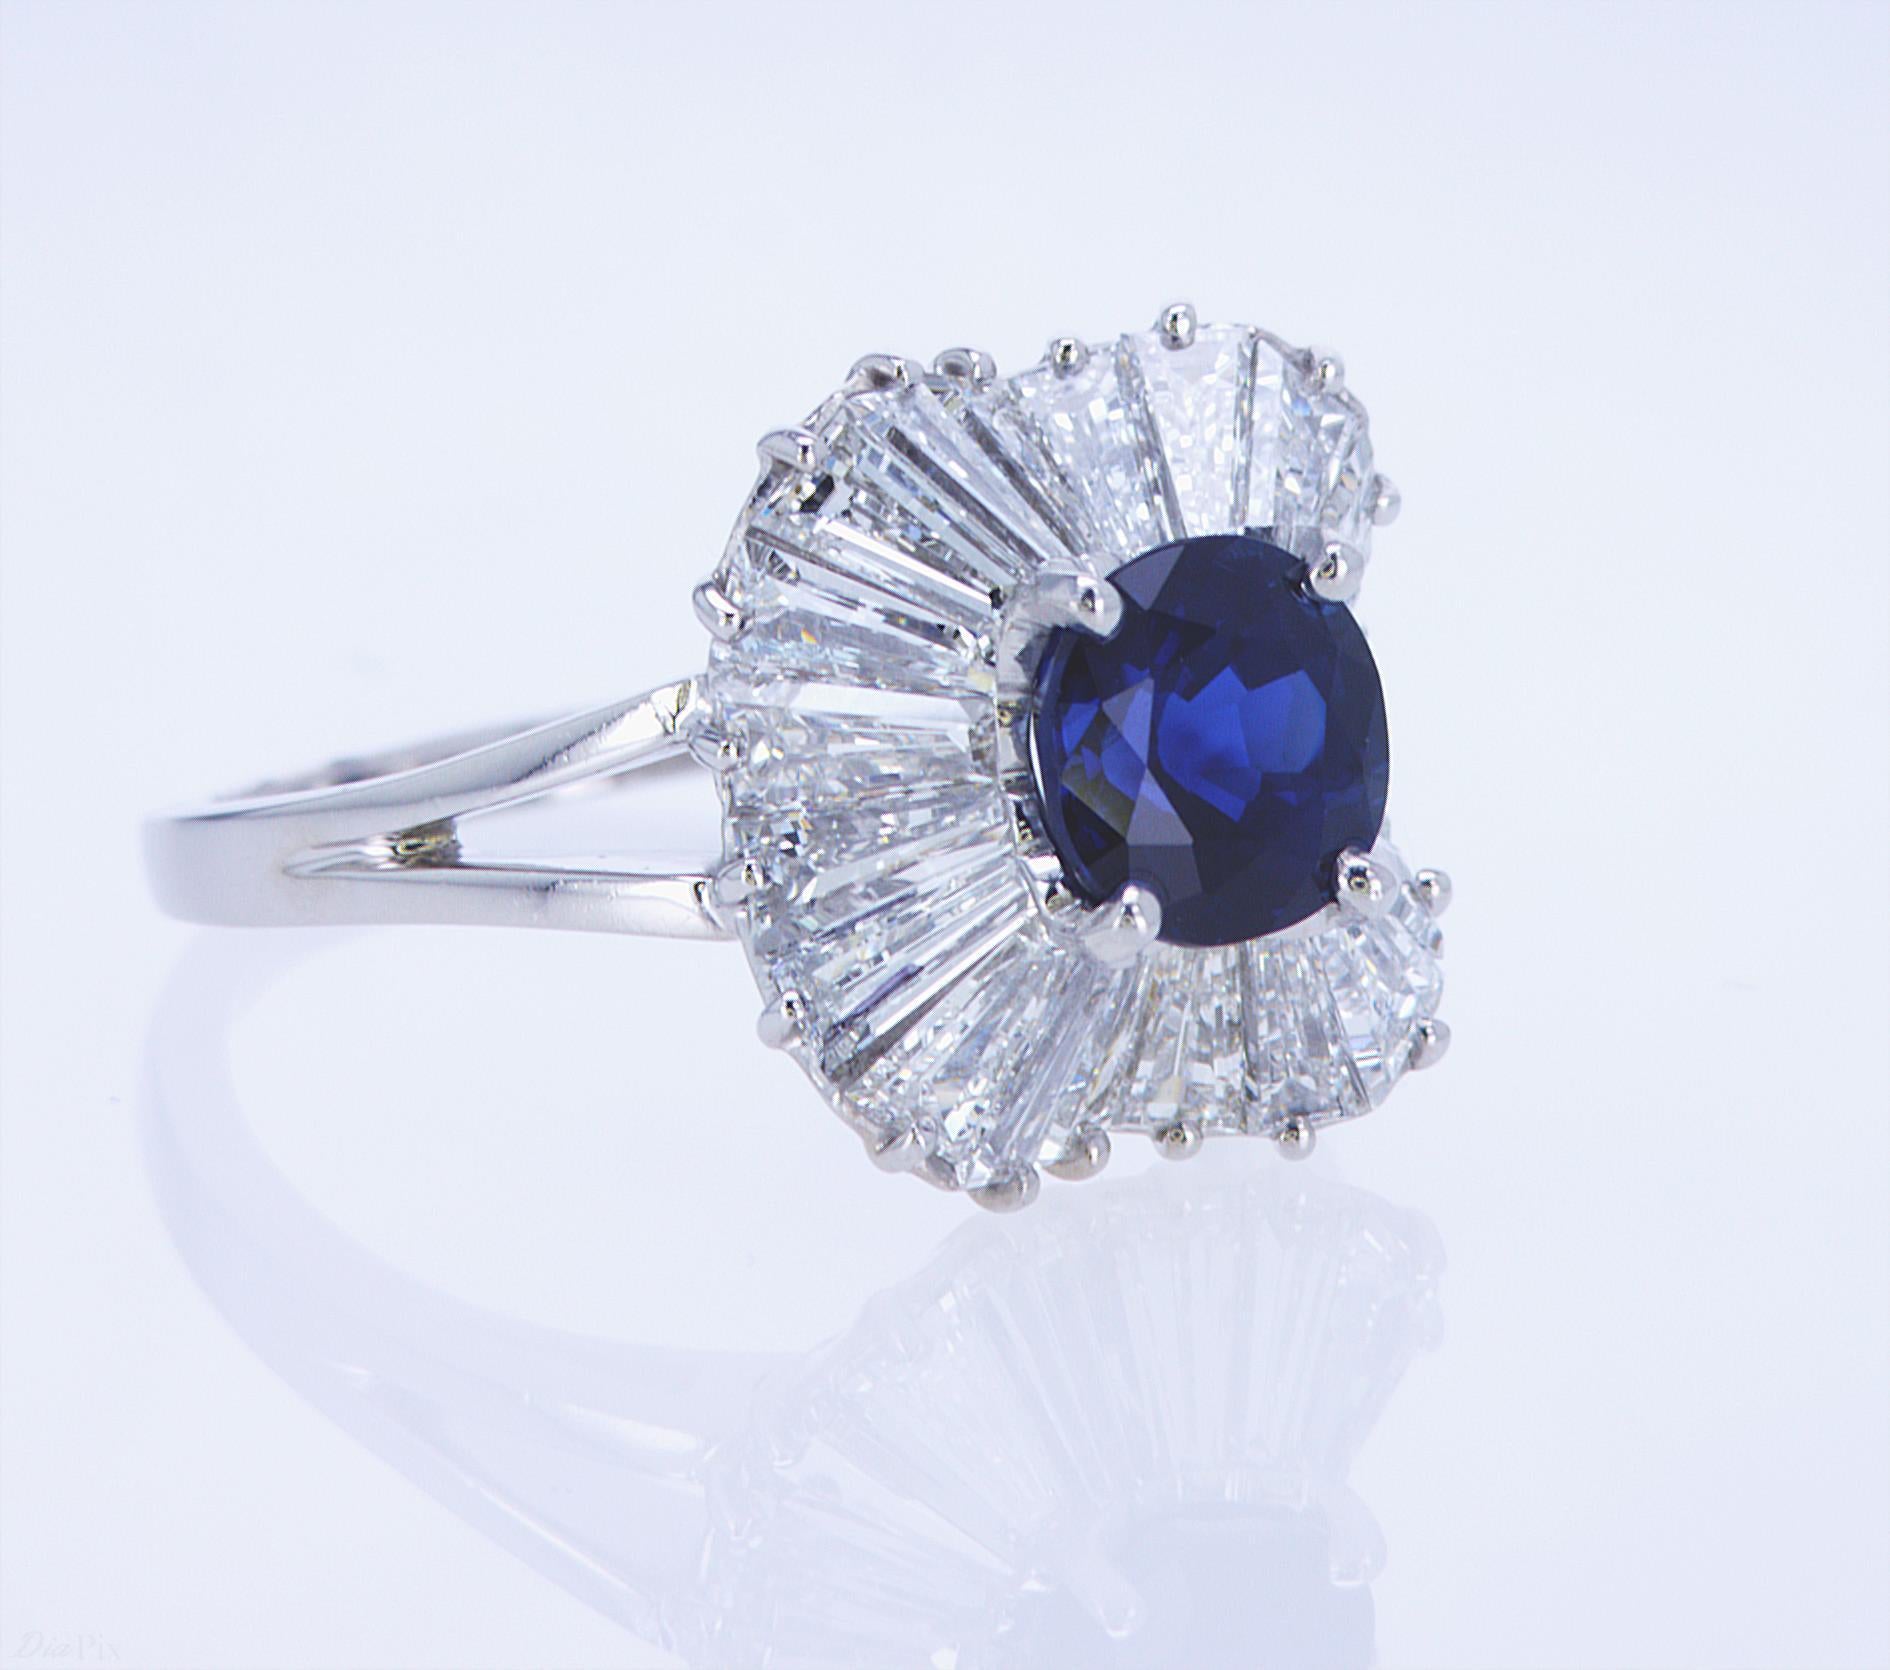 Platinum Ballerina Sapphire and Diamond Ring by Oscar Heyman, circa 1974. 1.99ct Sapphire, 20 Tapered Baguettes weighing 2.58ct TW.